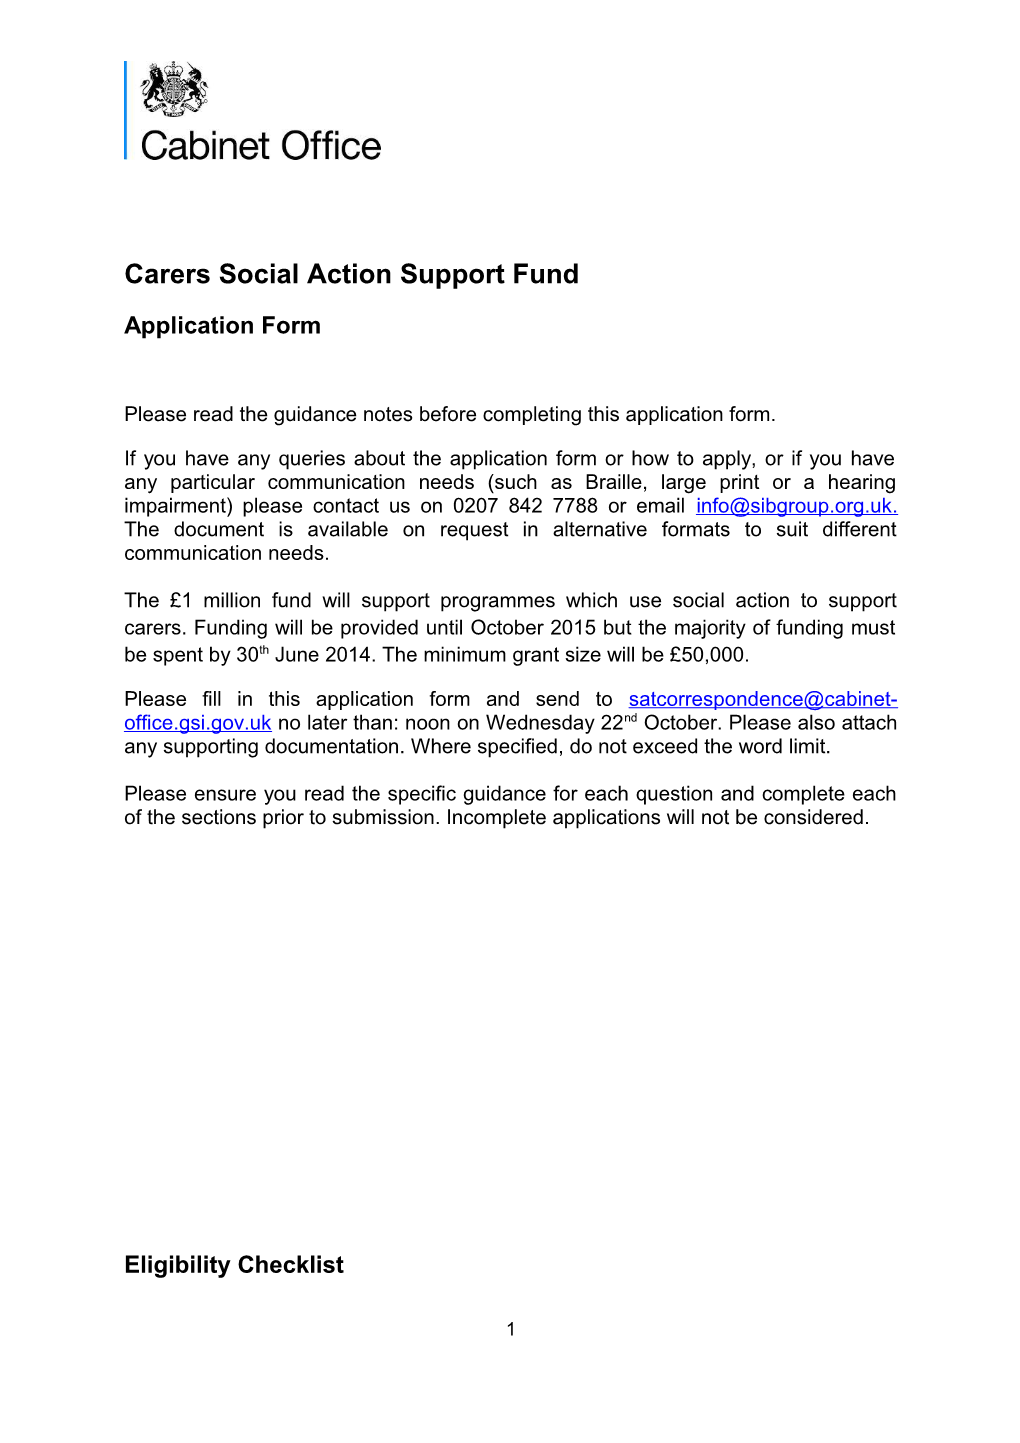 Carers Social Action Support Fund